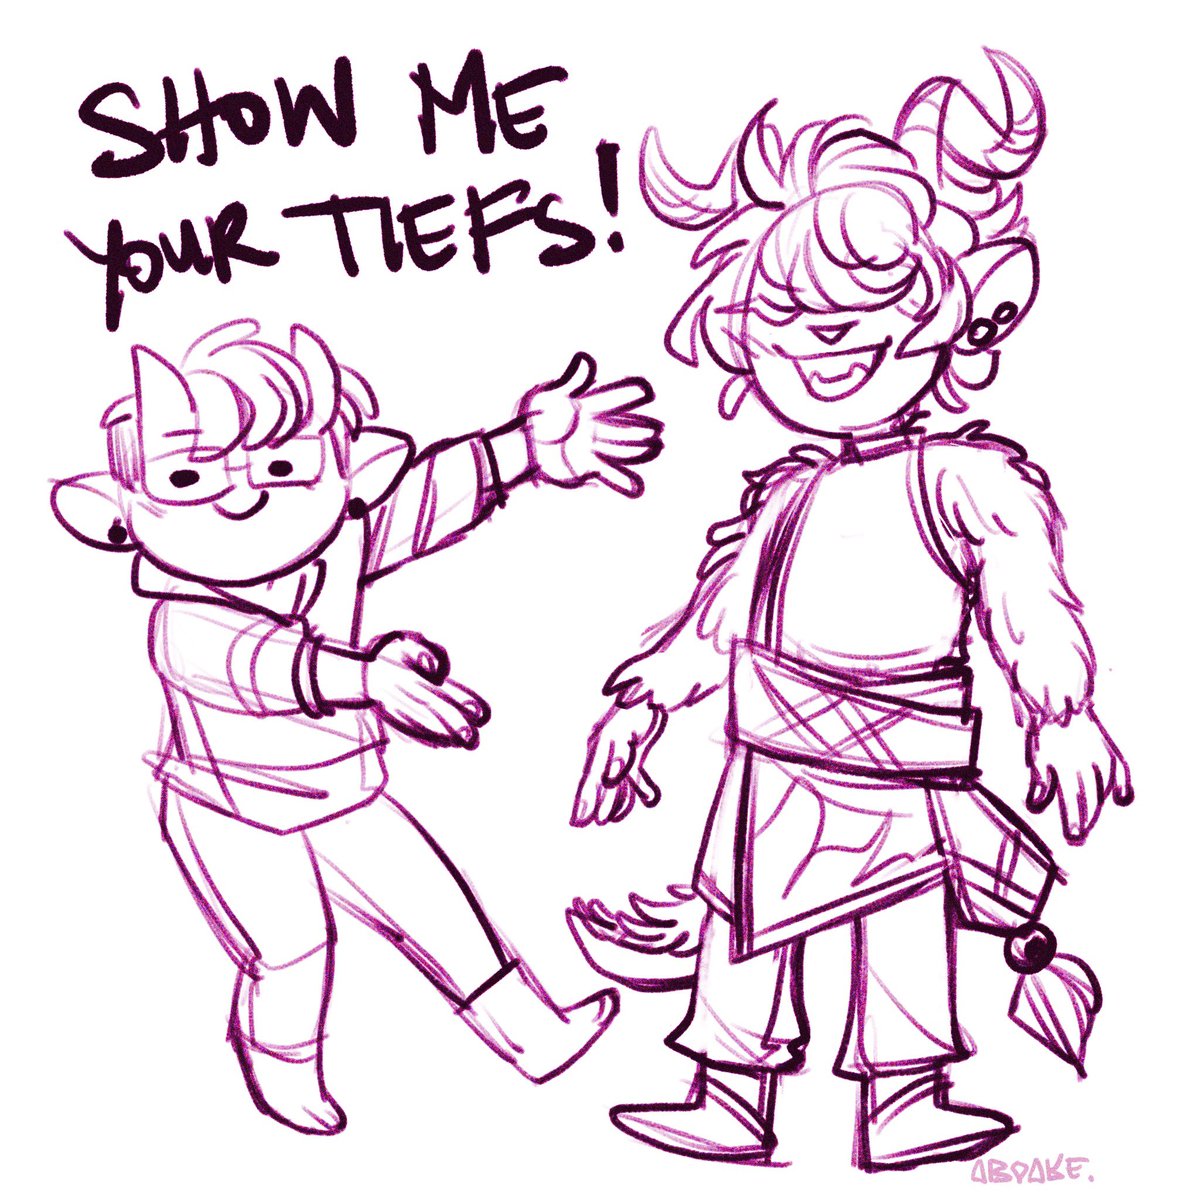 Since my pen needs charging and I’m just barely fighting off the urge to make another, please show me ur Tiefling and demon OCs! (If you’re not the artist, please tag/credit ur artists ty ty)